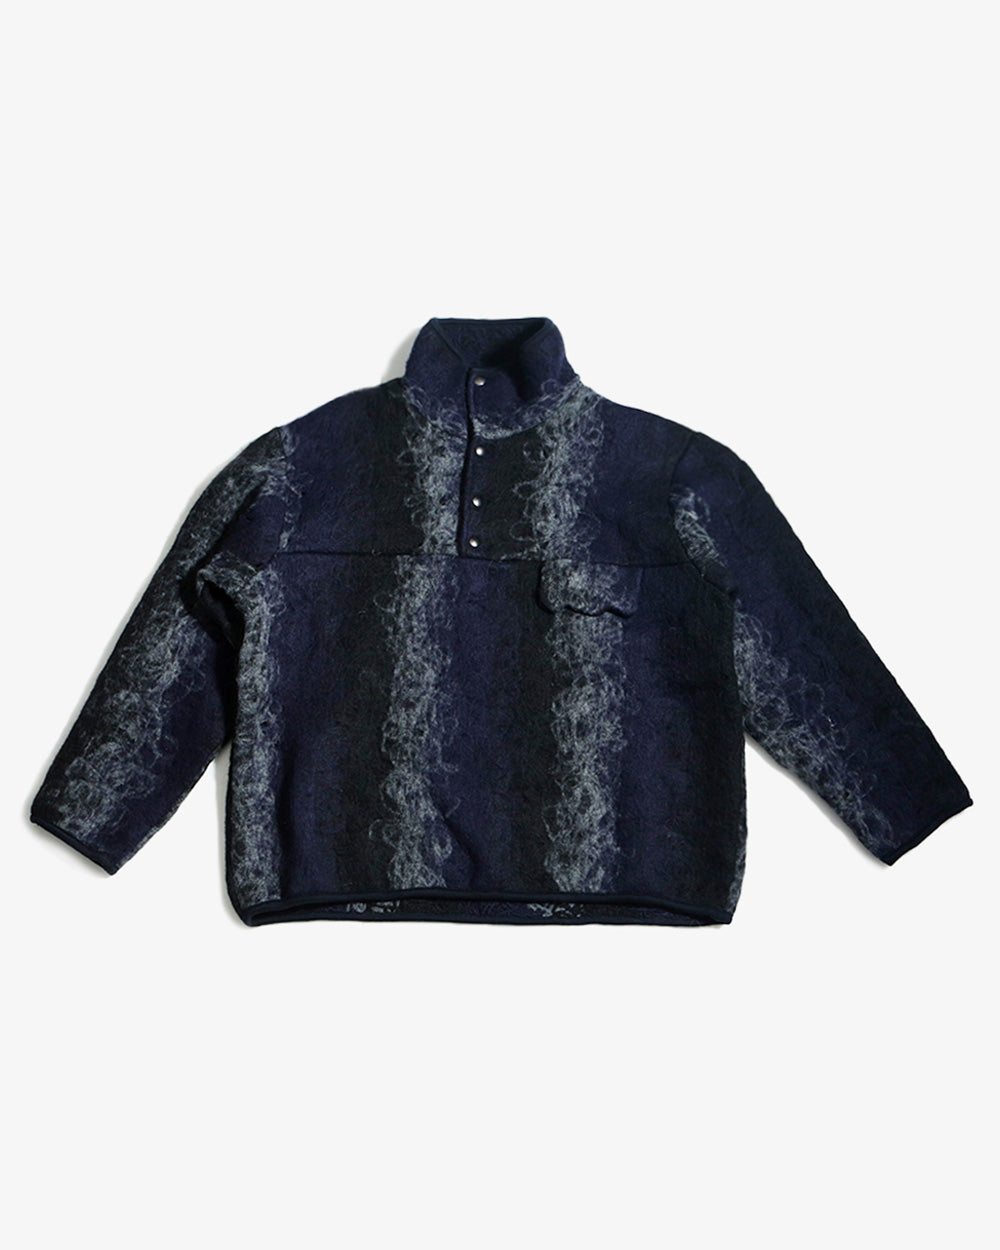 Button-Up Pullover Black And Navy